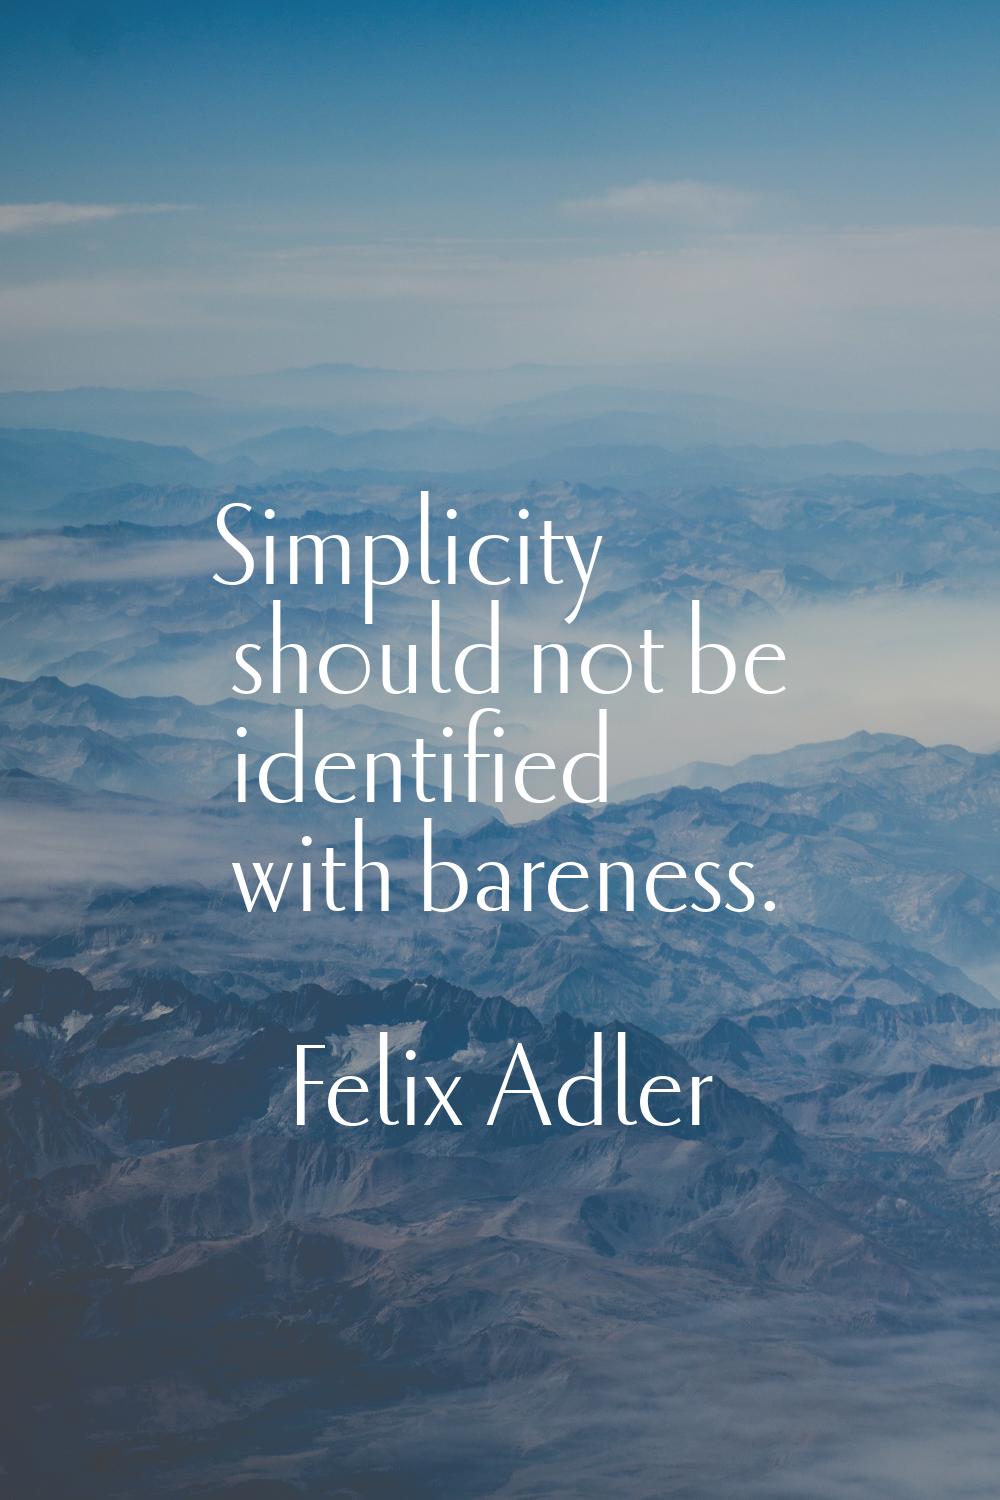 Simplicity should not be identified with bareness.